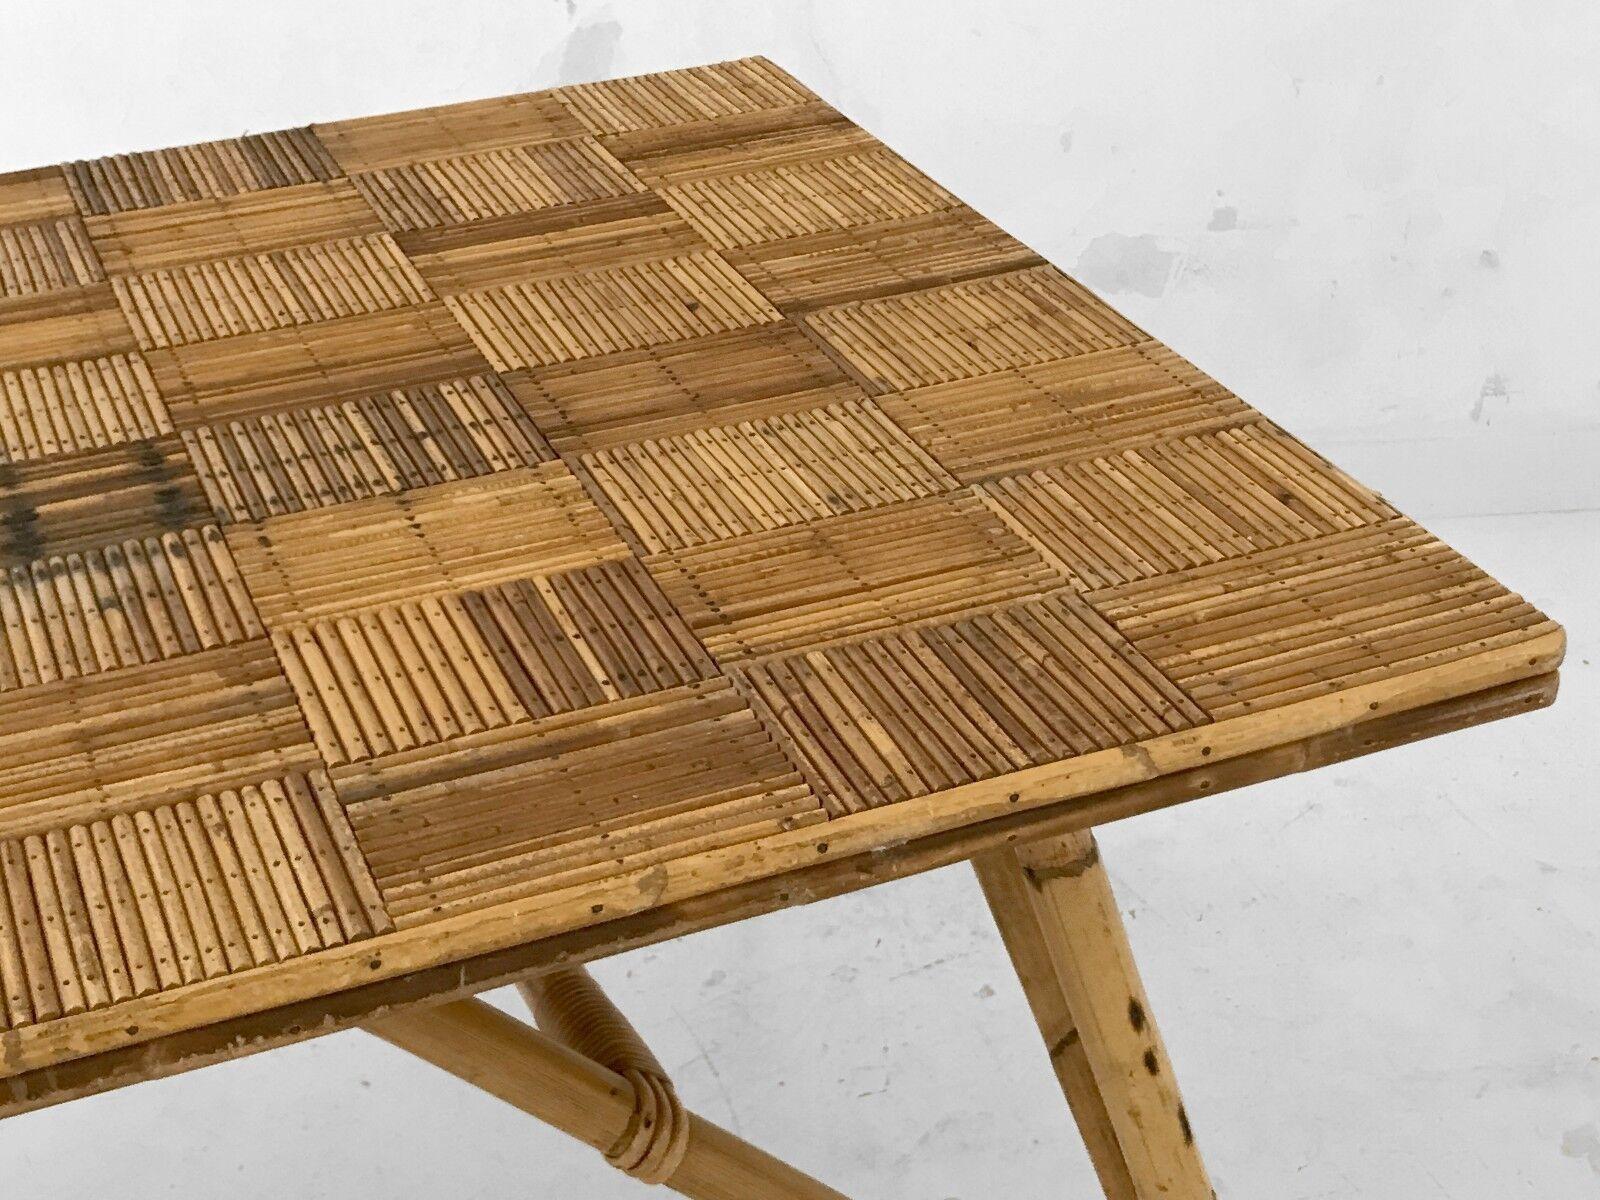 Bamboo A MID-CENTURY-MODERN BRUTALIST Dining TABLE by AUDOUX-MINNET, France 1950 For Sale